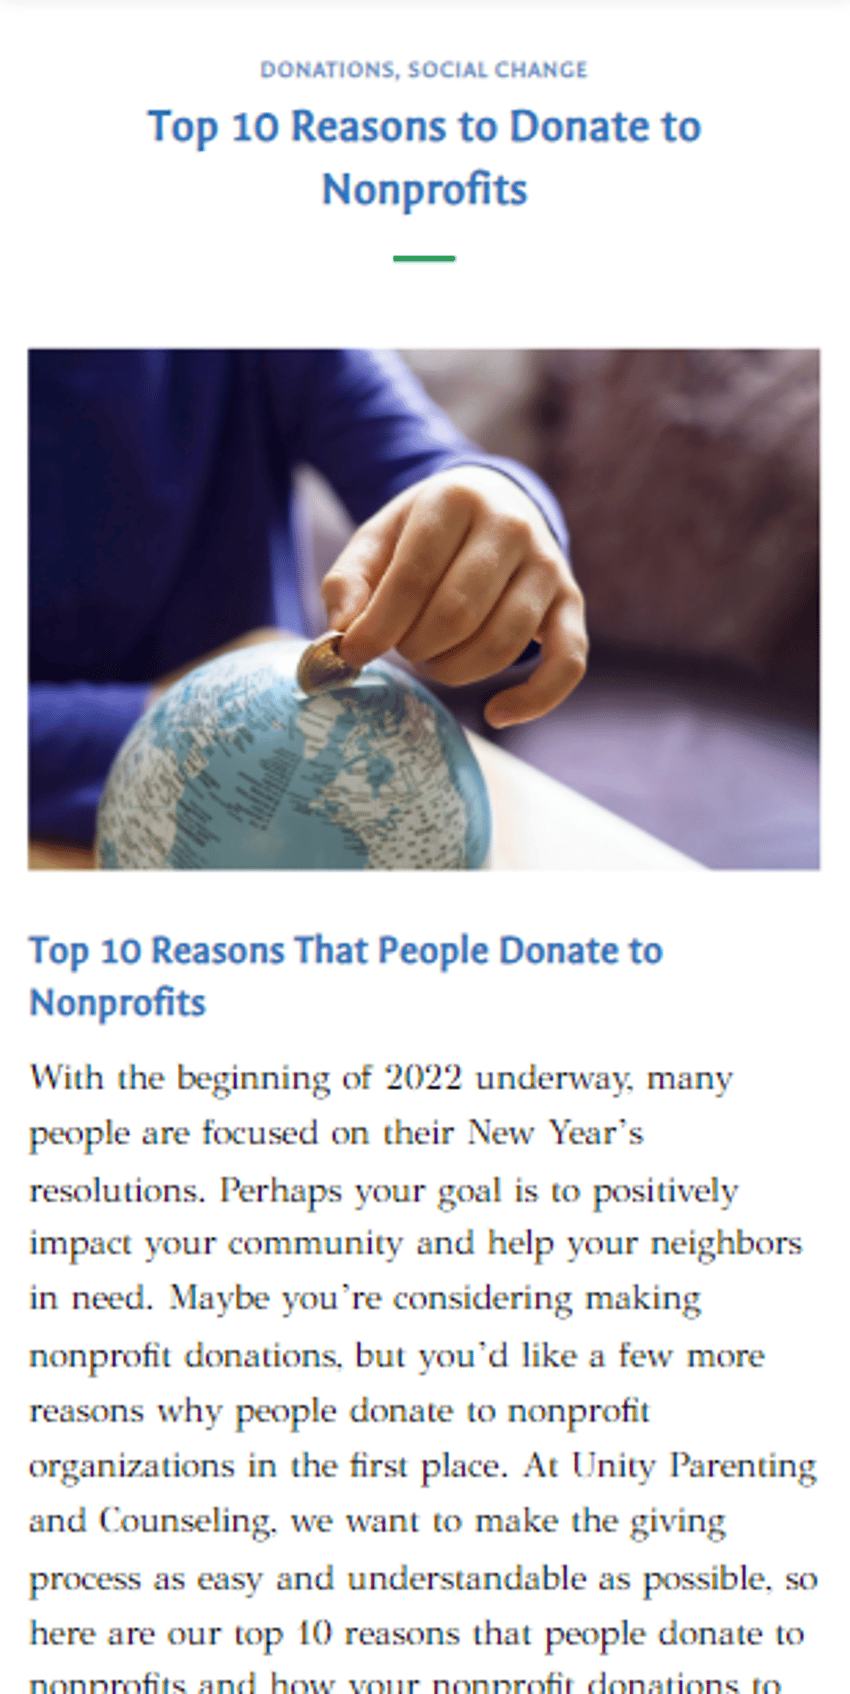 check out the full post [here](https://unityparenting.org/top-10-reasons-to-nonprofits/)